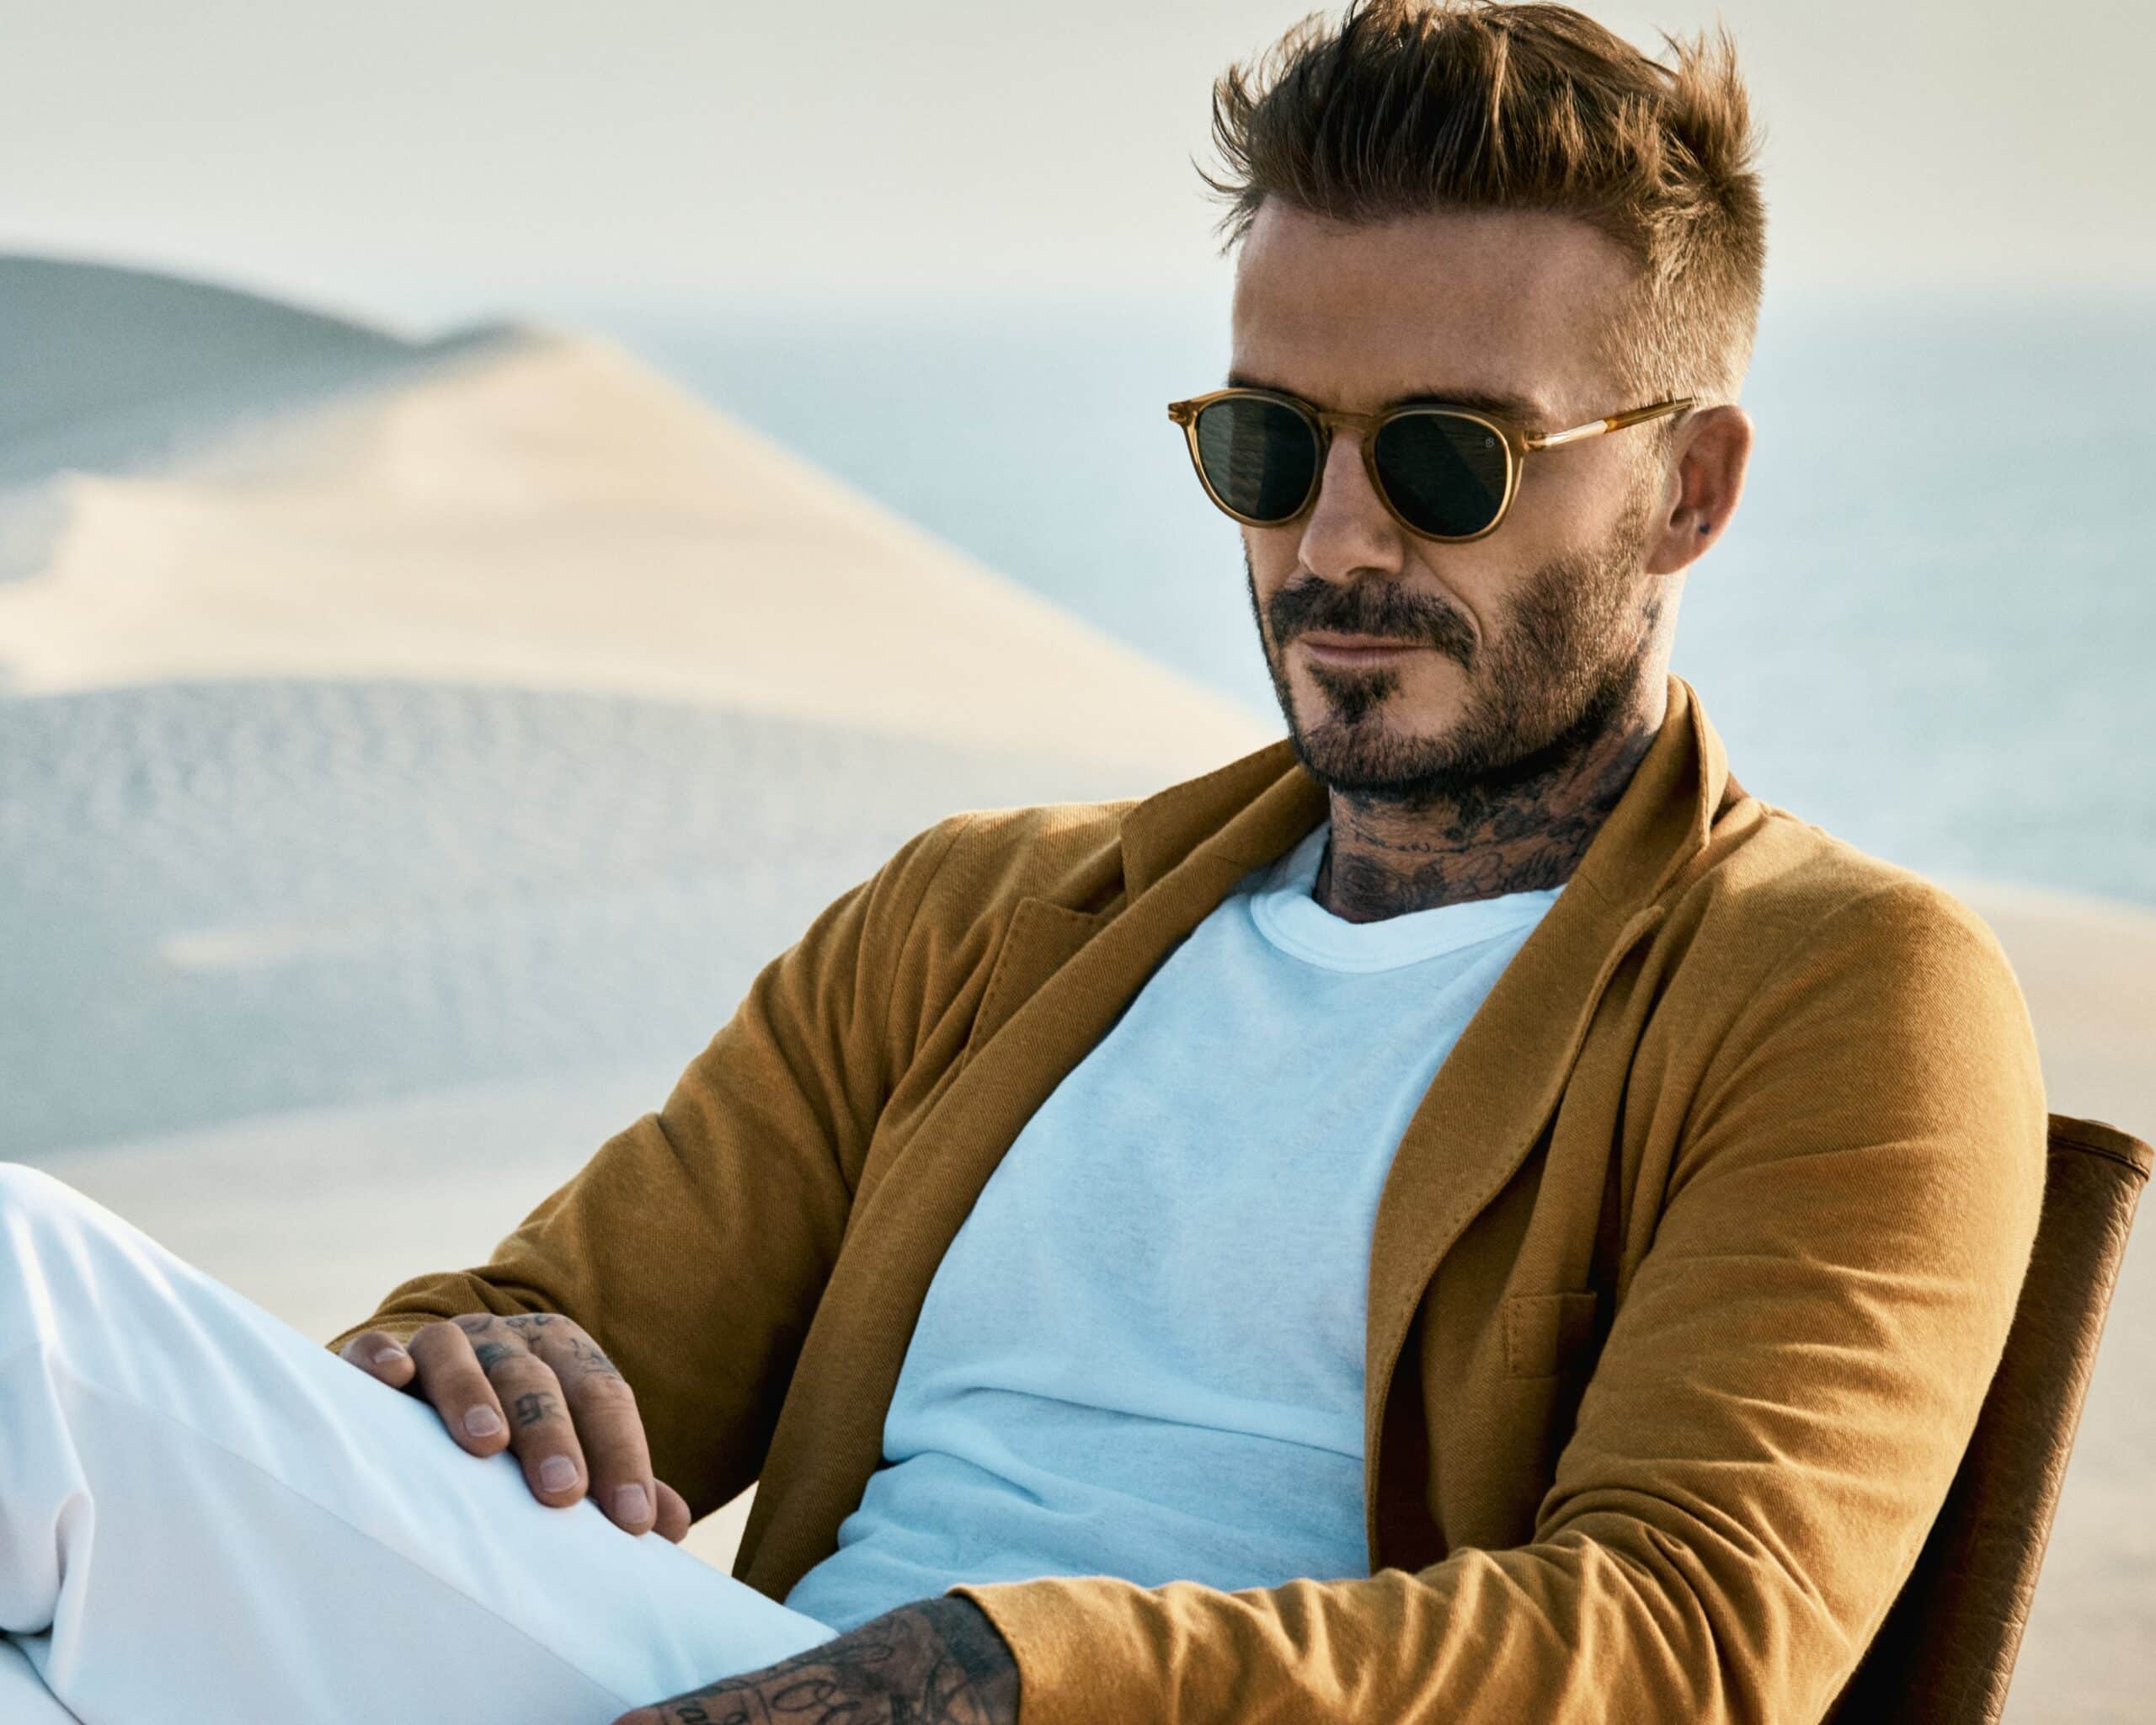 Sunglasses from David Beckham DB 1114/S Yellow Havana will be a great accessory for your style